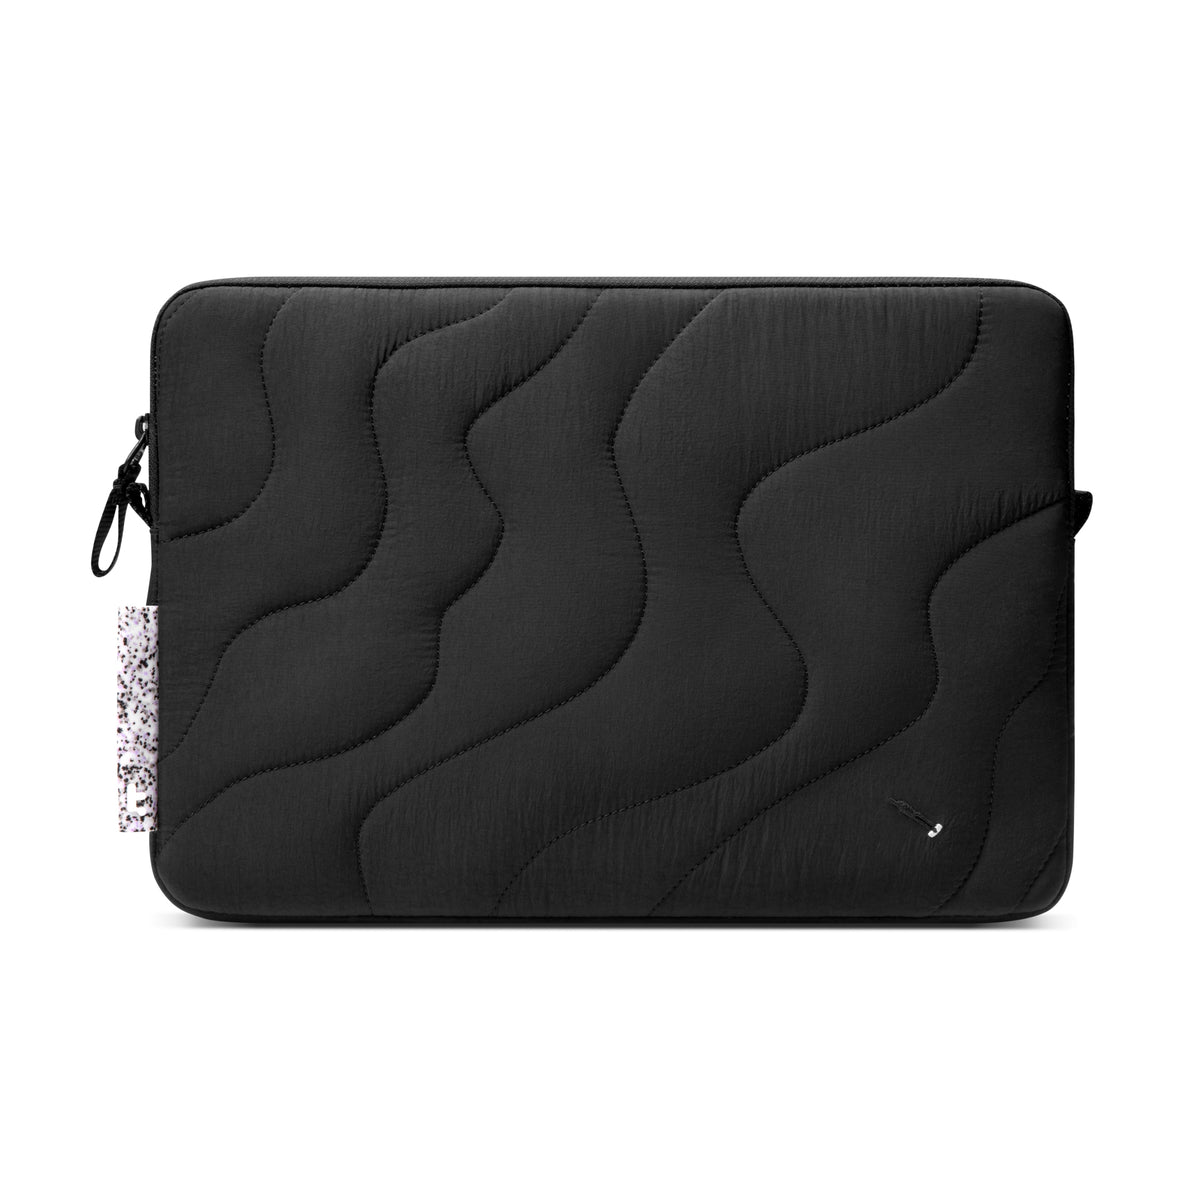 primary_Terra-A27 Laptop Sleeve for MacBook